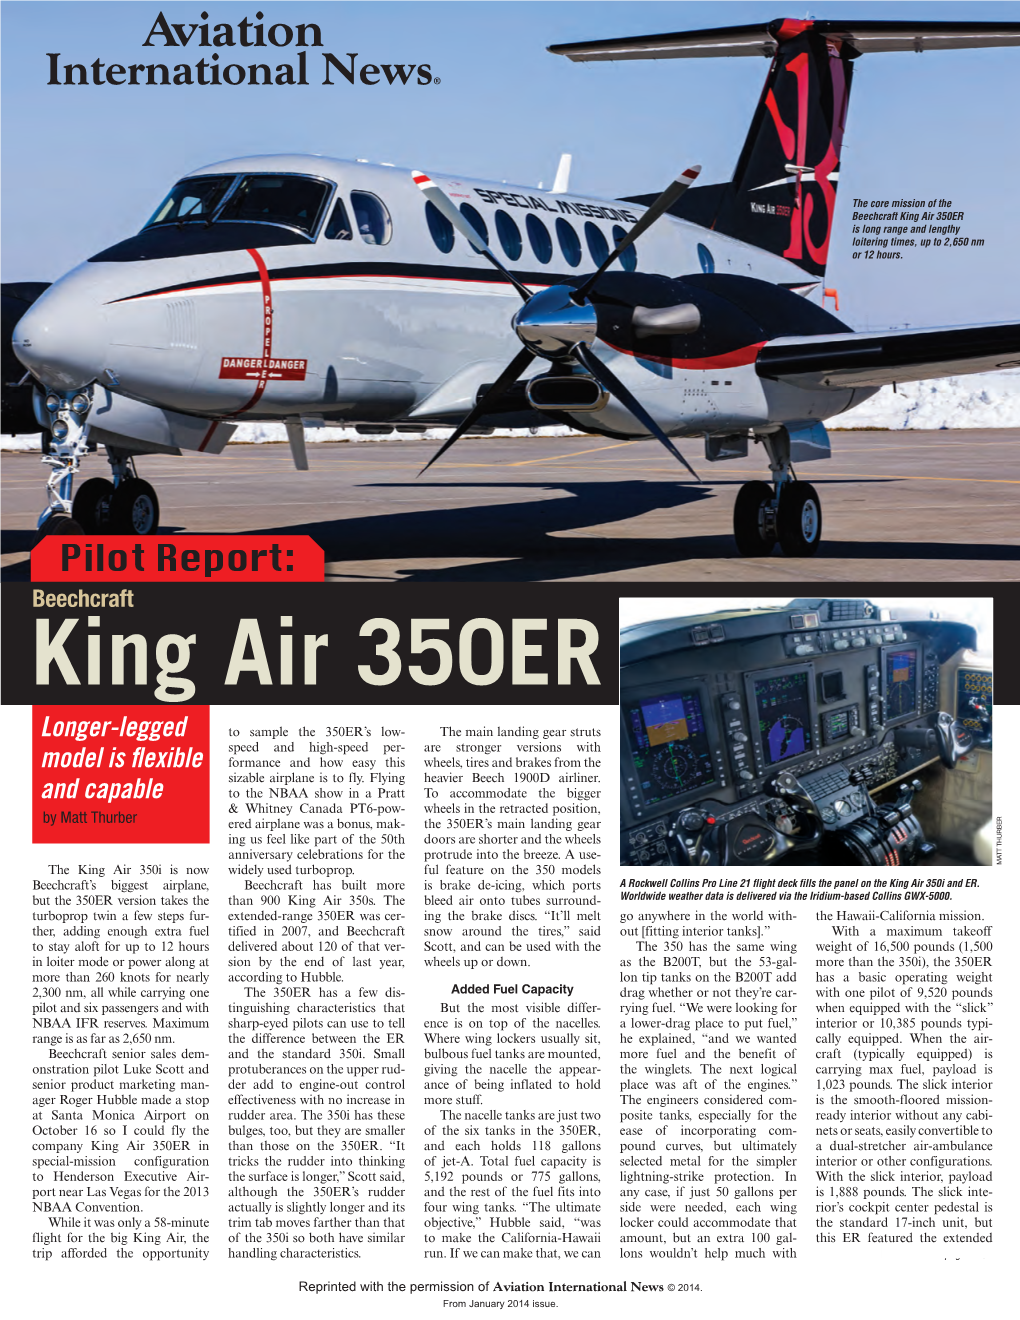 Beechcraft King Air 350ER Is Long Range and Lengthy Loitering Times, up to 2,650 Nm Or 12 Hours